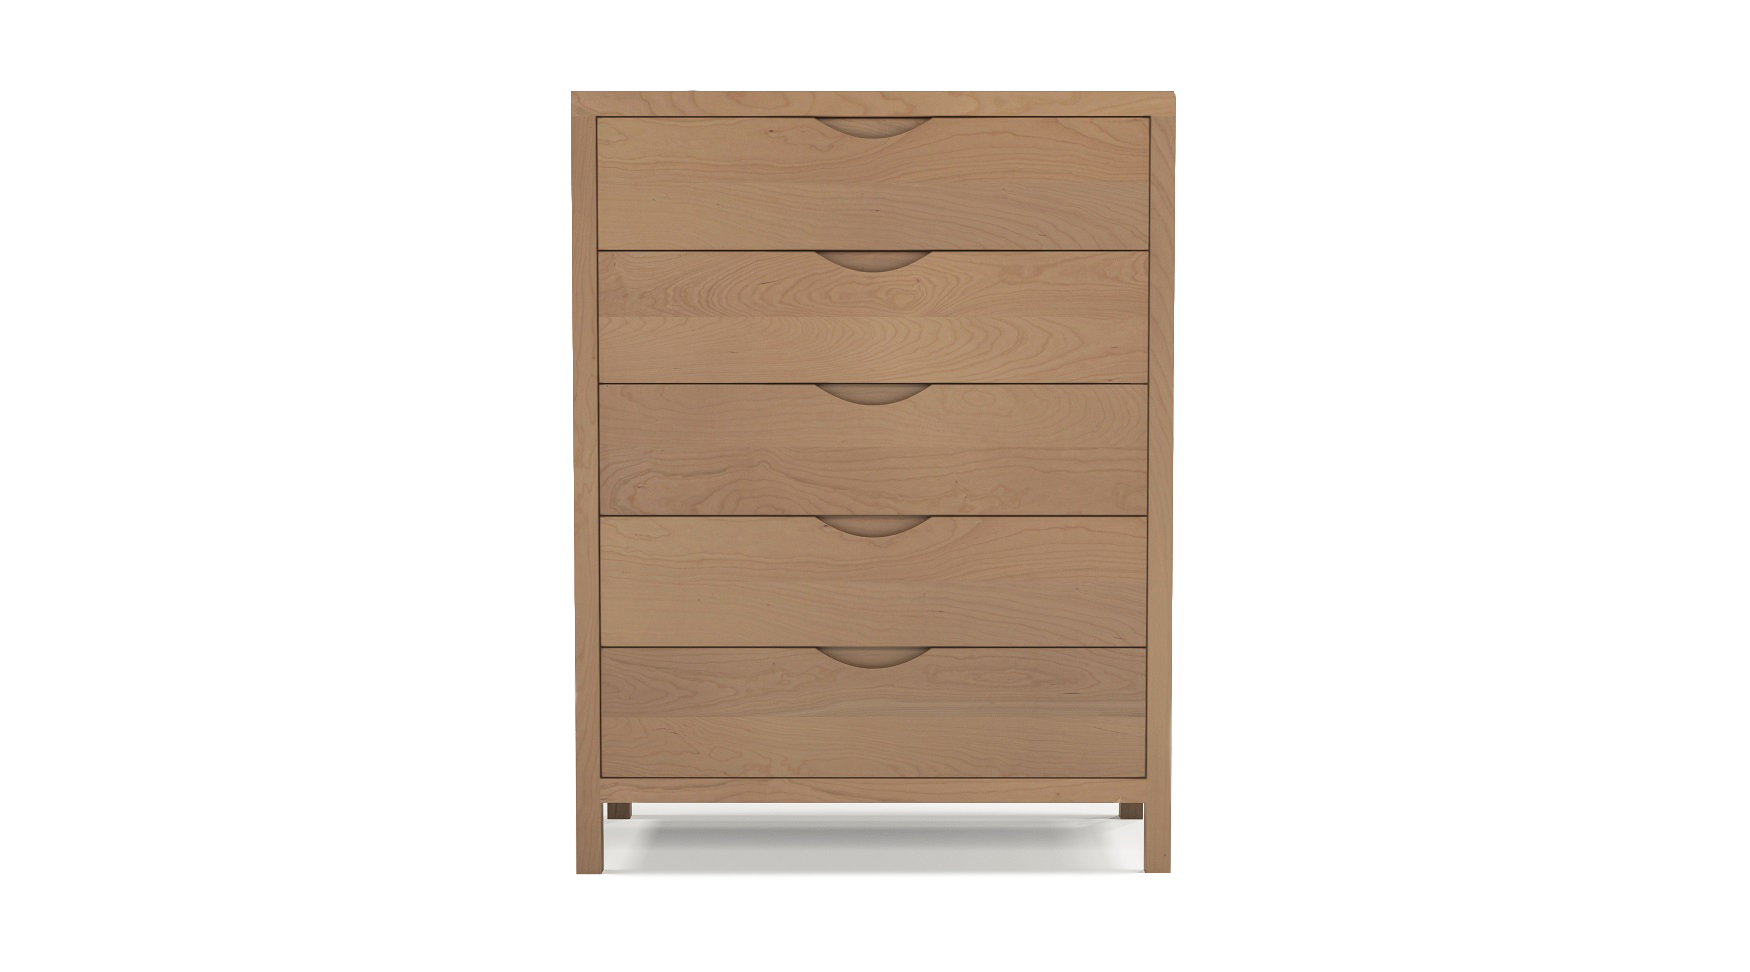 Cherry wood luxury furniture five drawer dresser with integrated wood handles